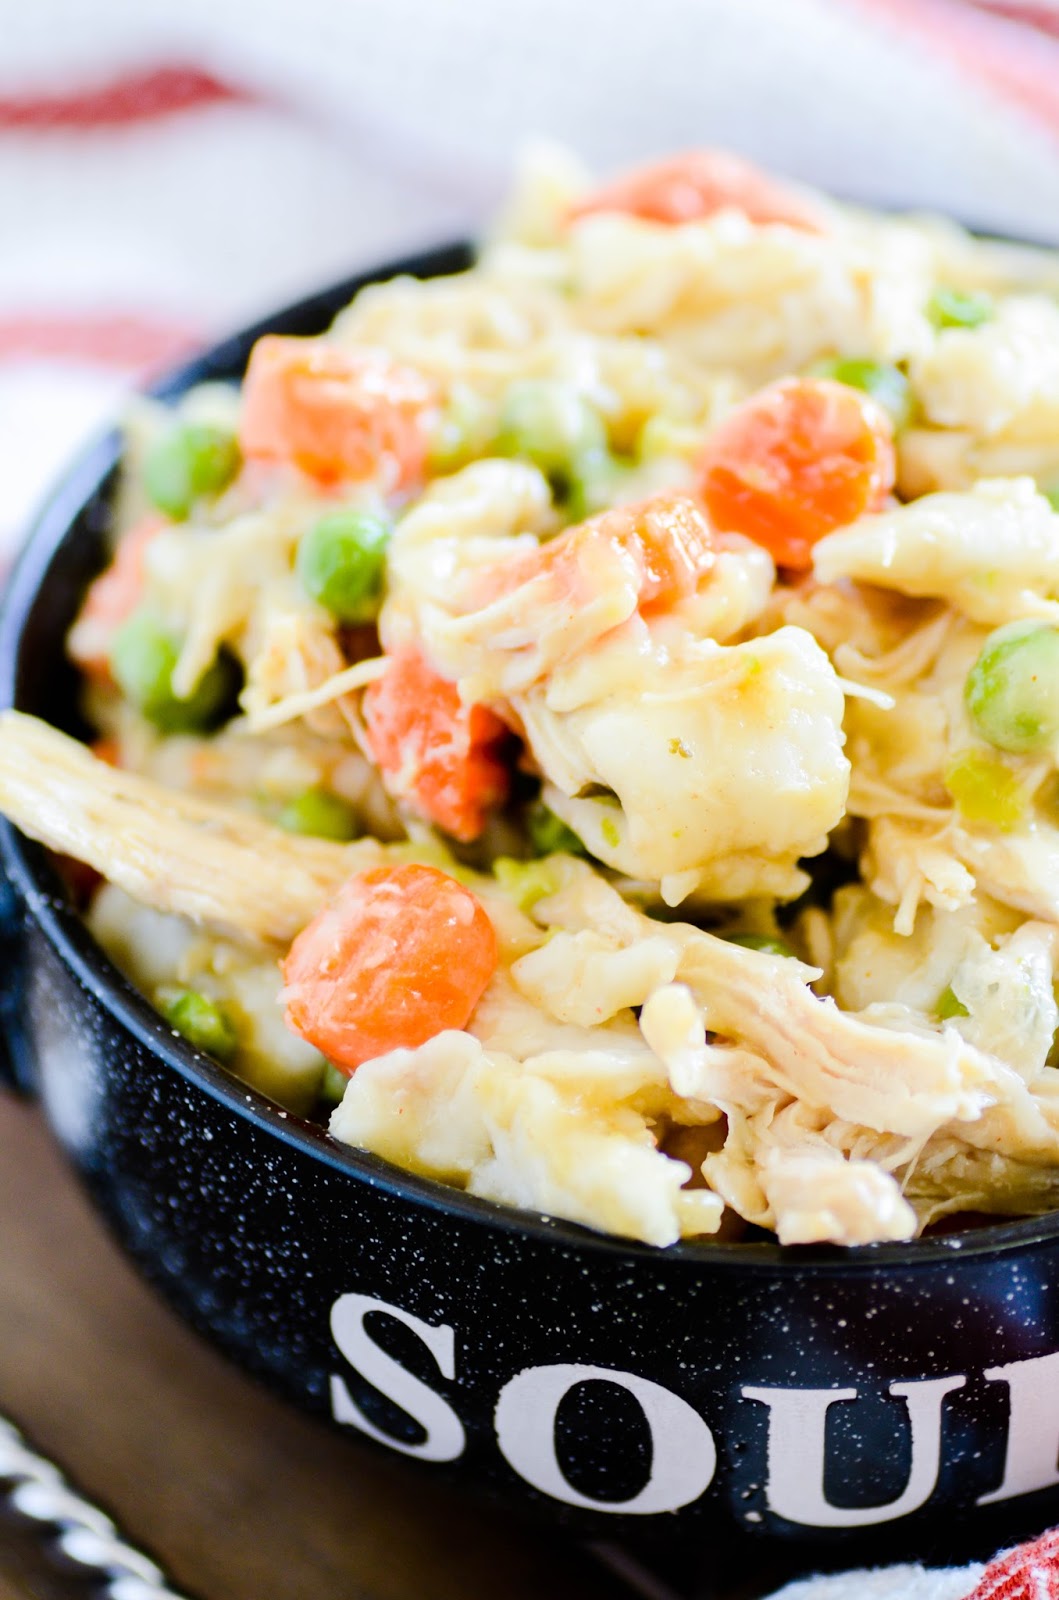 A quick and easy weeknight dinner of chicken and dumplings that the whole family will love.